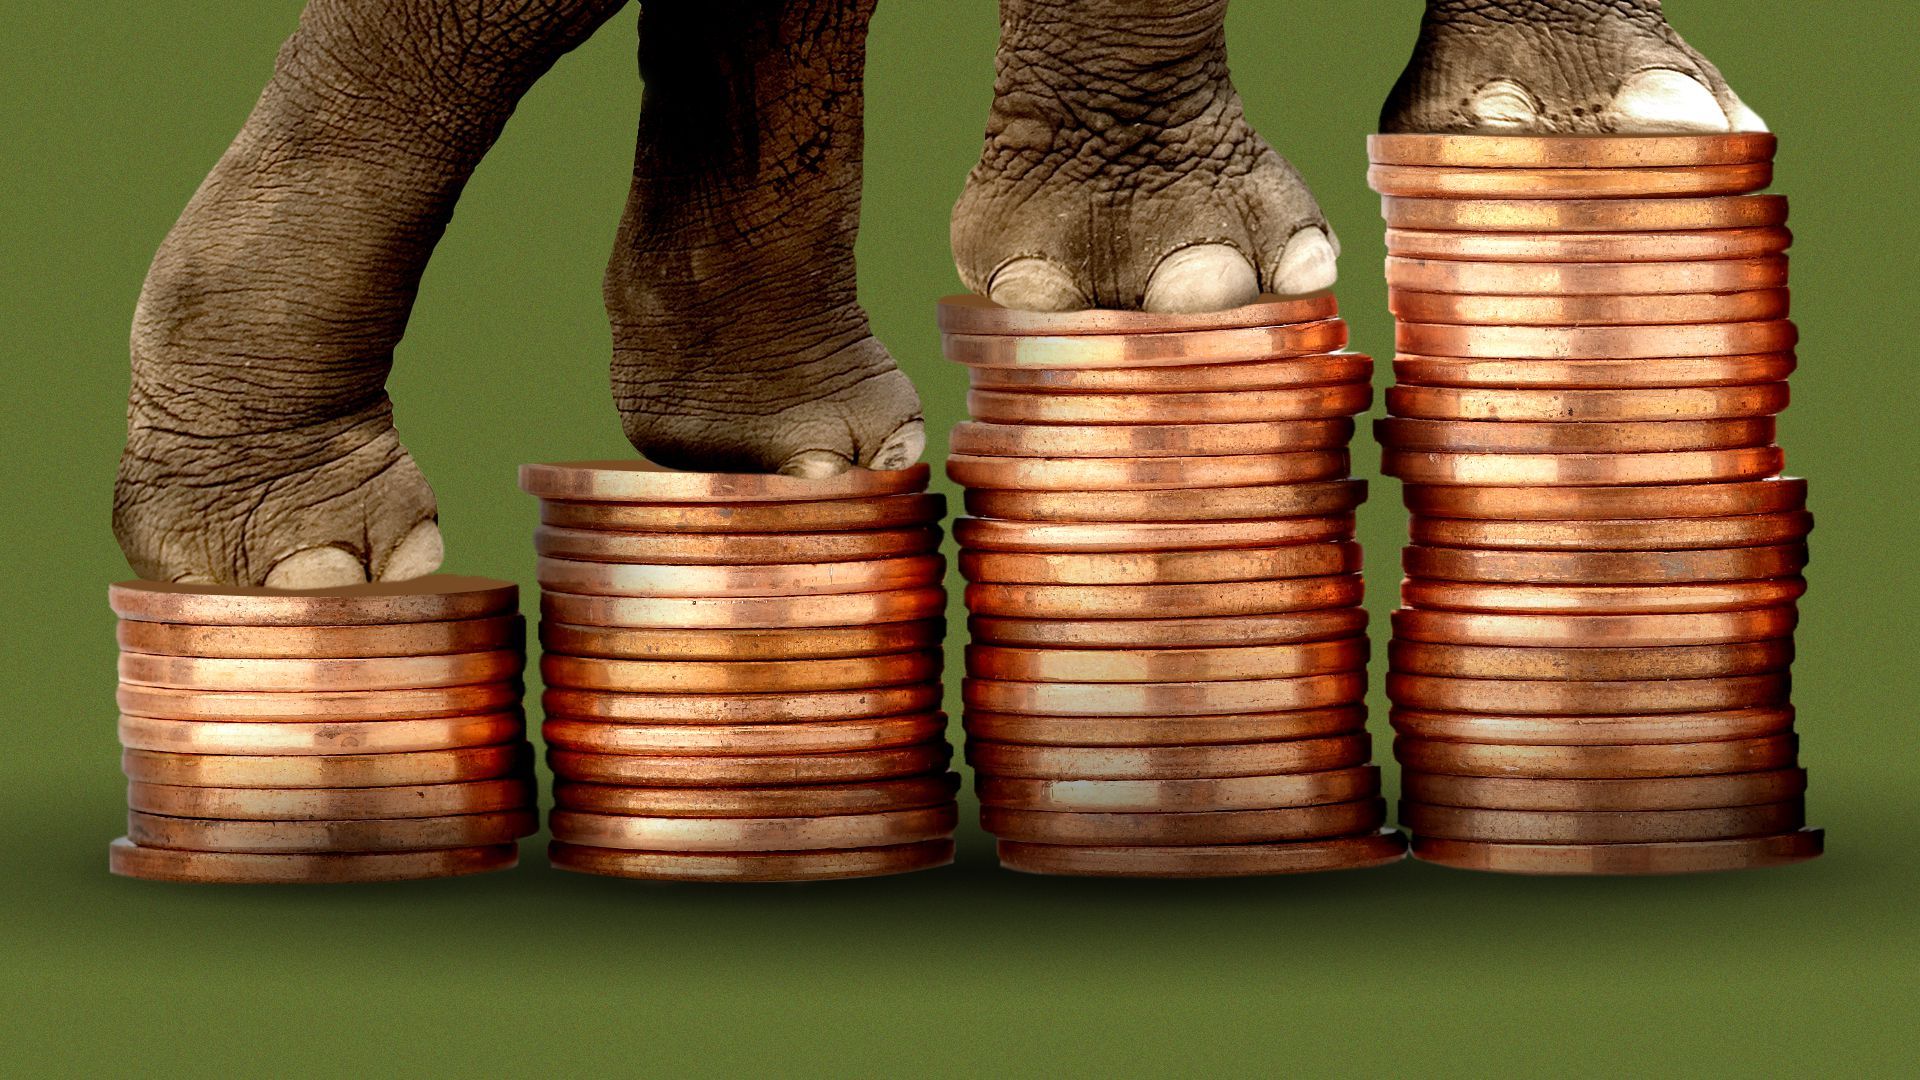 Illustration of an elephant's feet climbing stacks of pennies